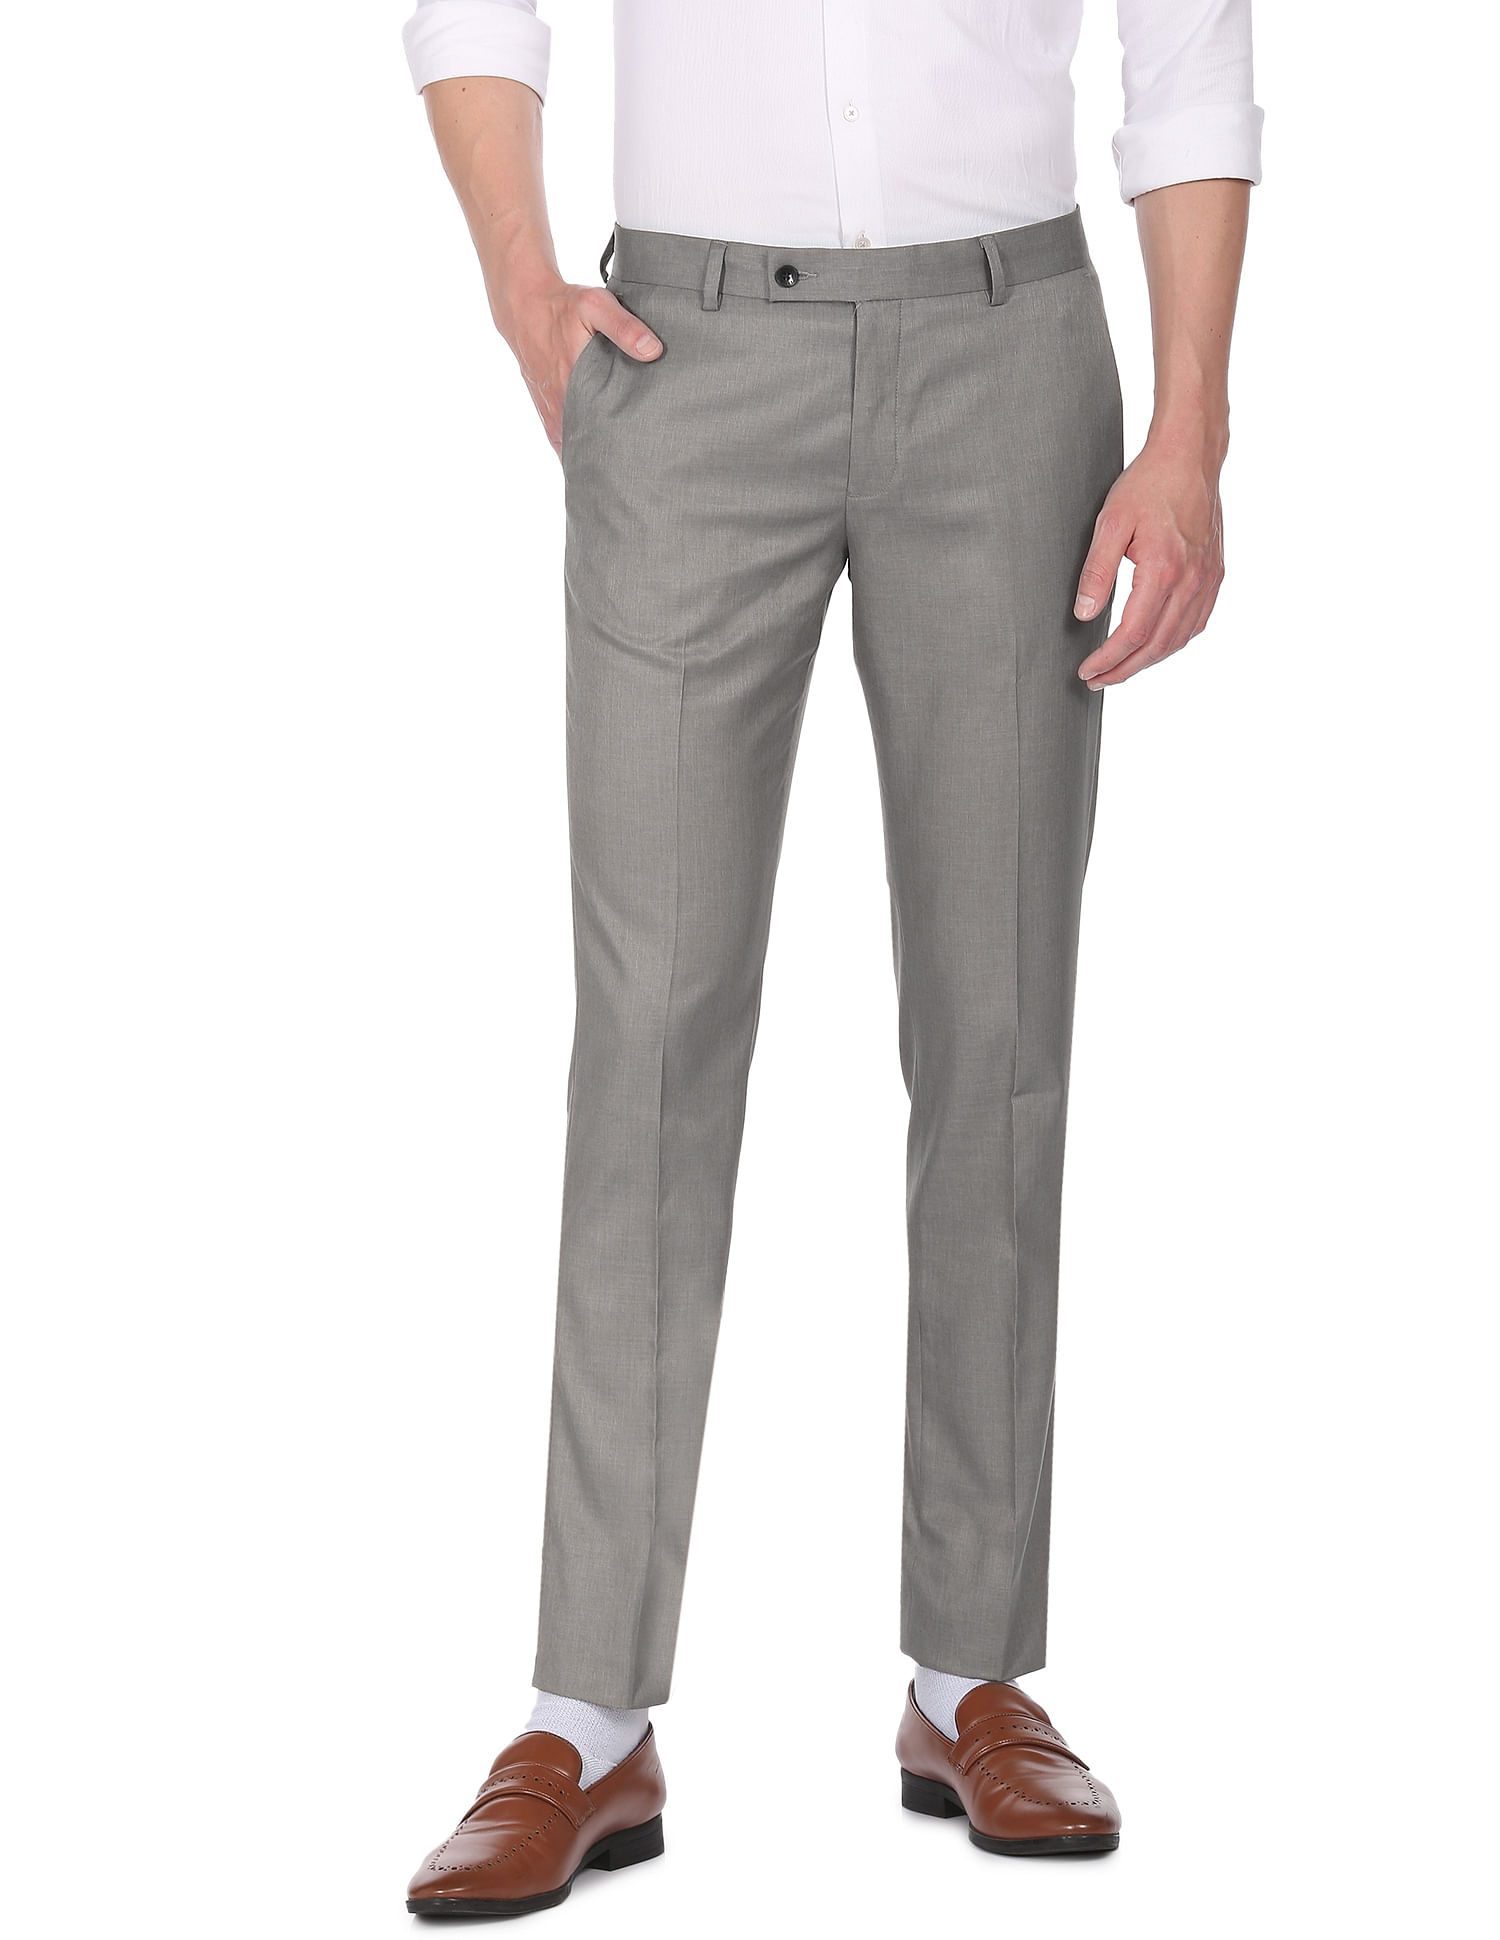 us polo association mens straight fit formal trousers at Best Price  1539  with many options Only in India at MartAvenuecom  Mart Avenue  MartAvenue